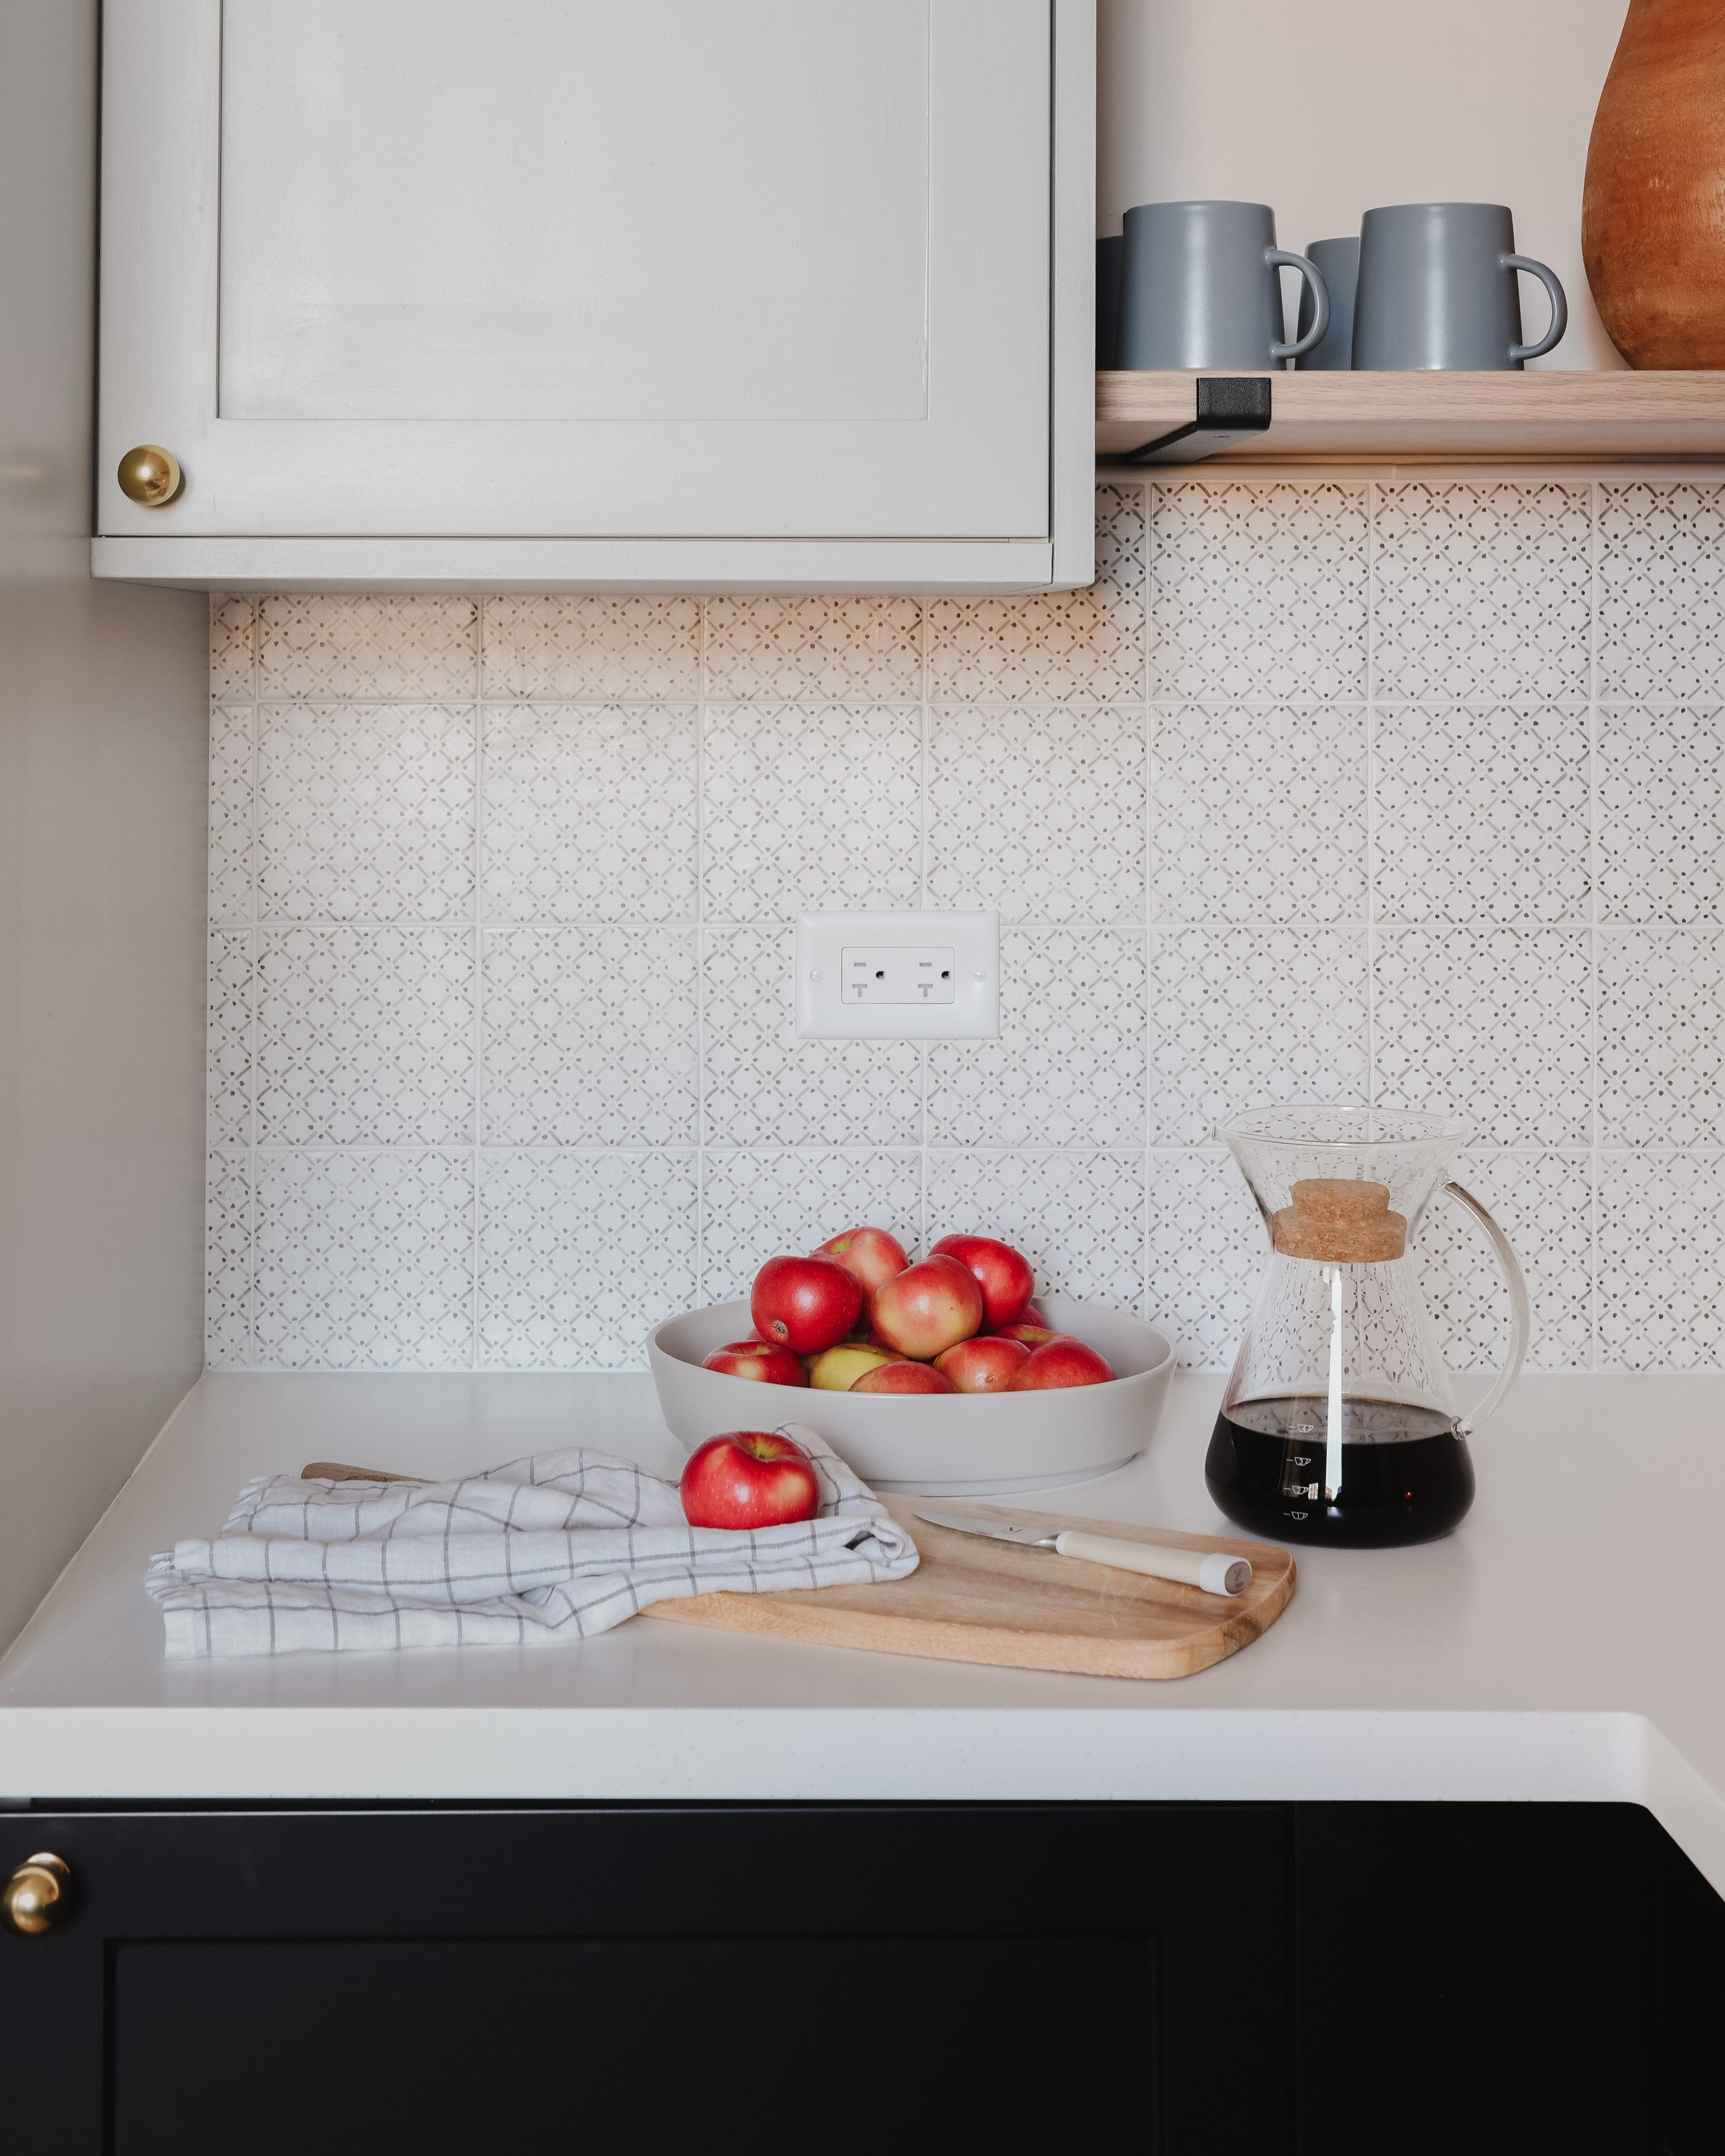 A close up of the kitchen counter, with apples, coffee and a cutting board. | via Yellow Brick Home